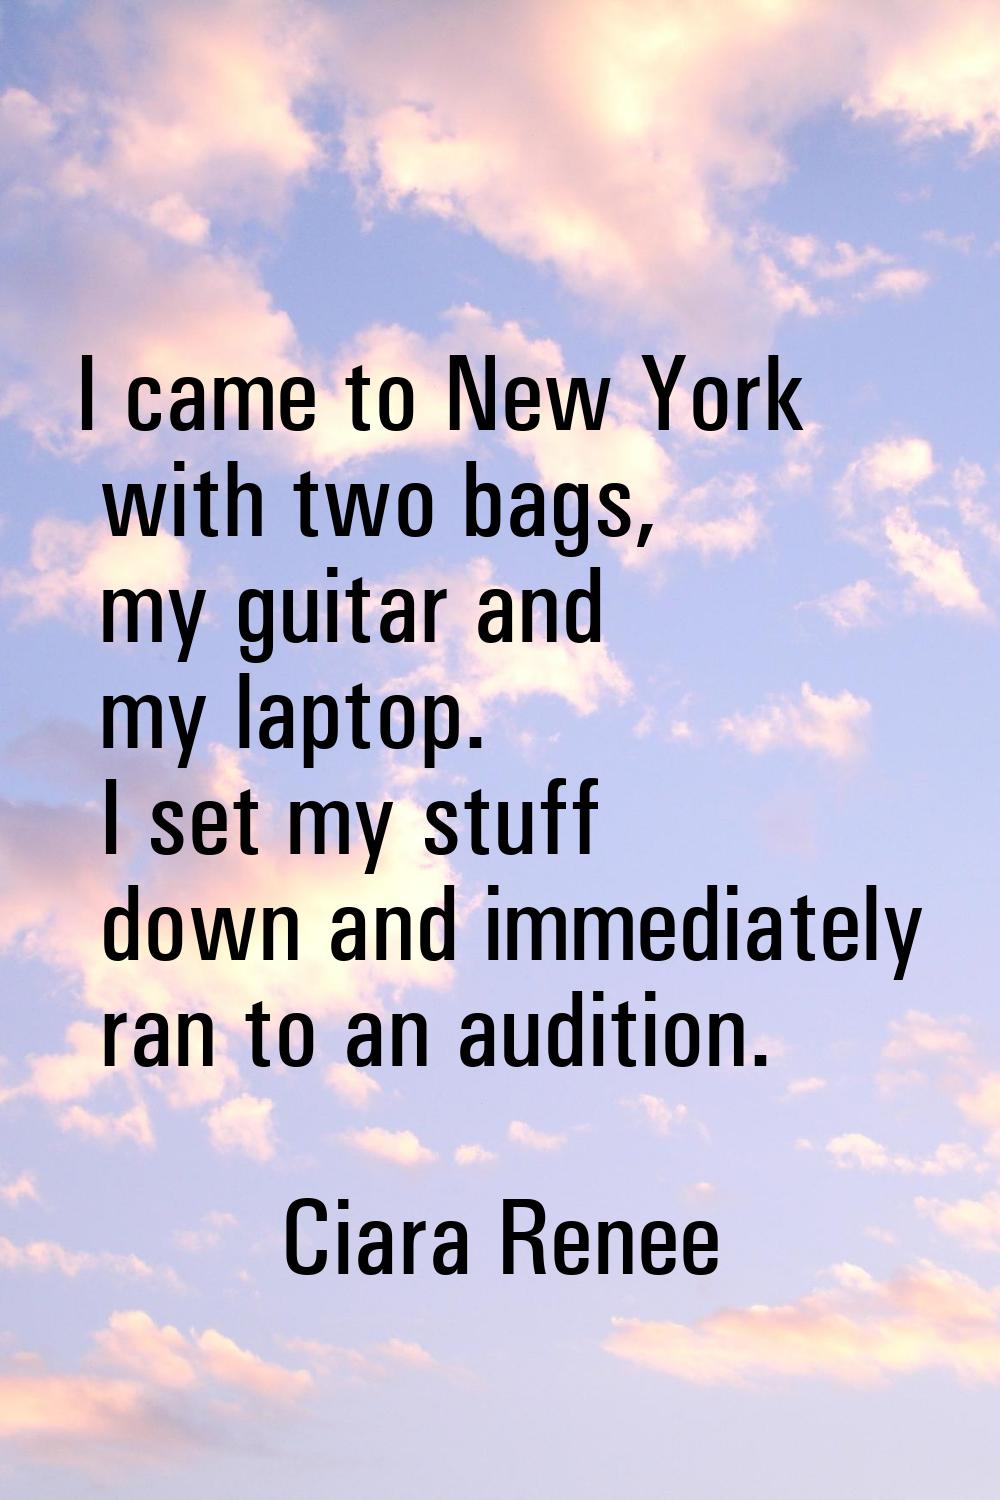 I came to New York with two bags, my guitar and my laptop. I set my stuff down and immediately ran 